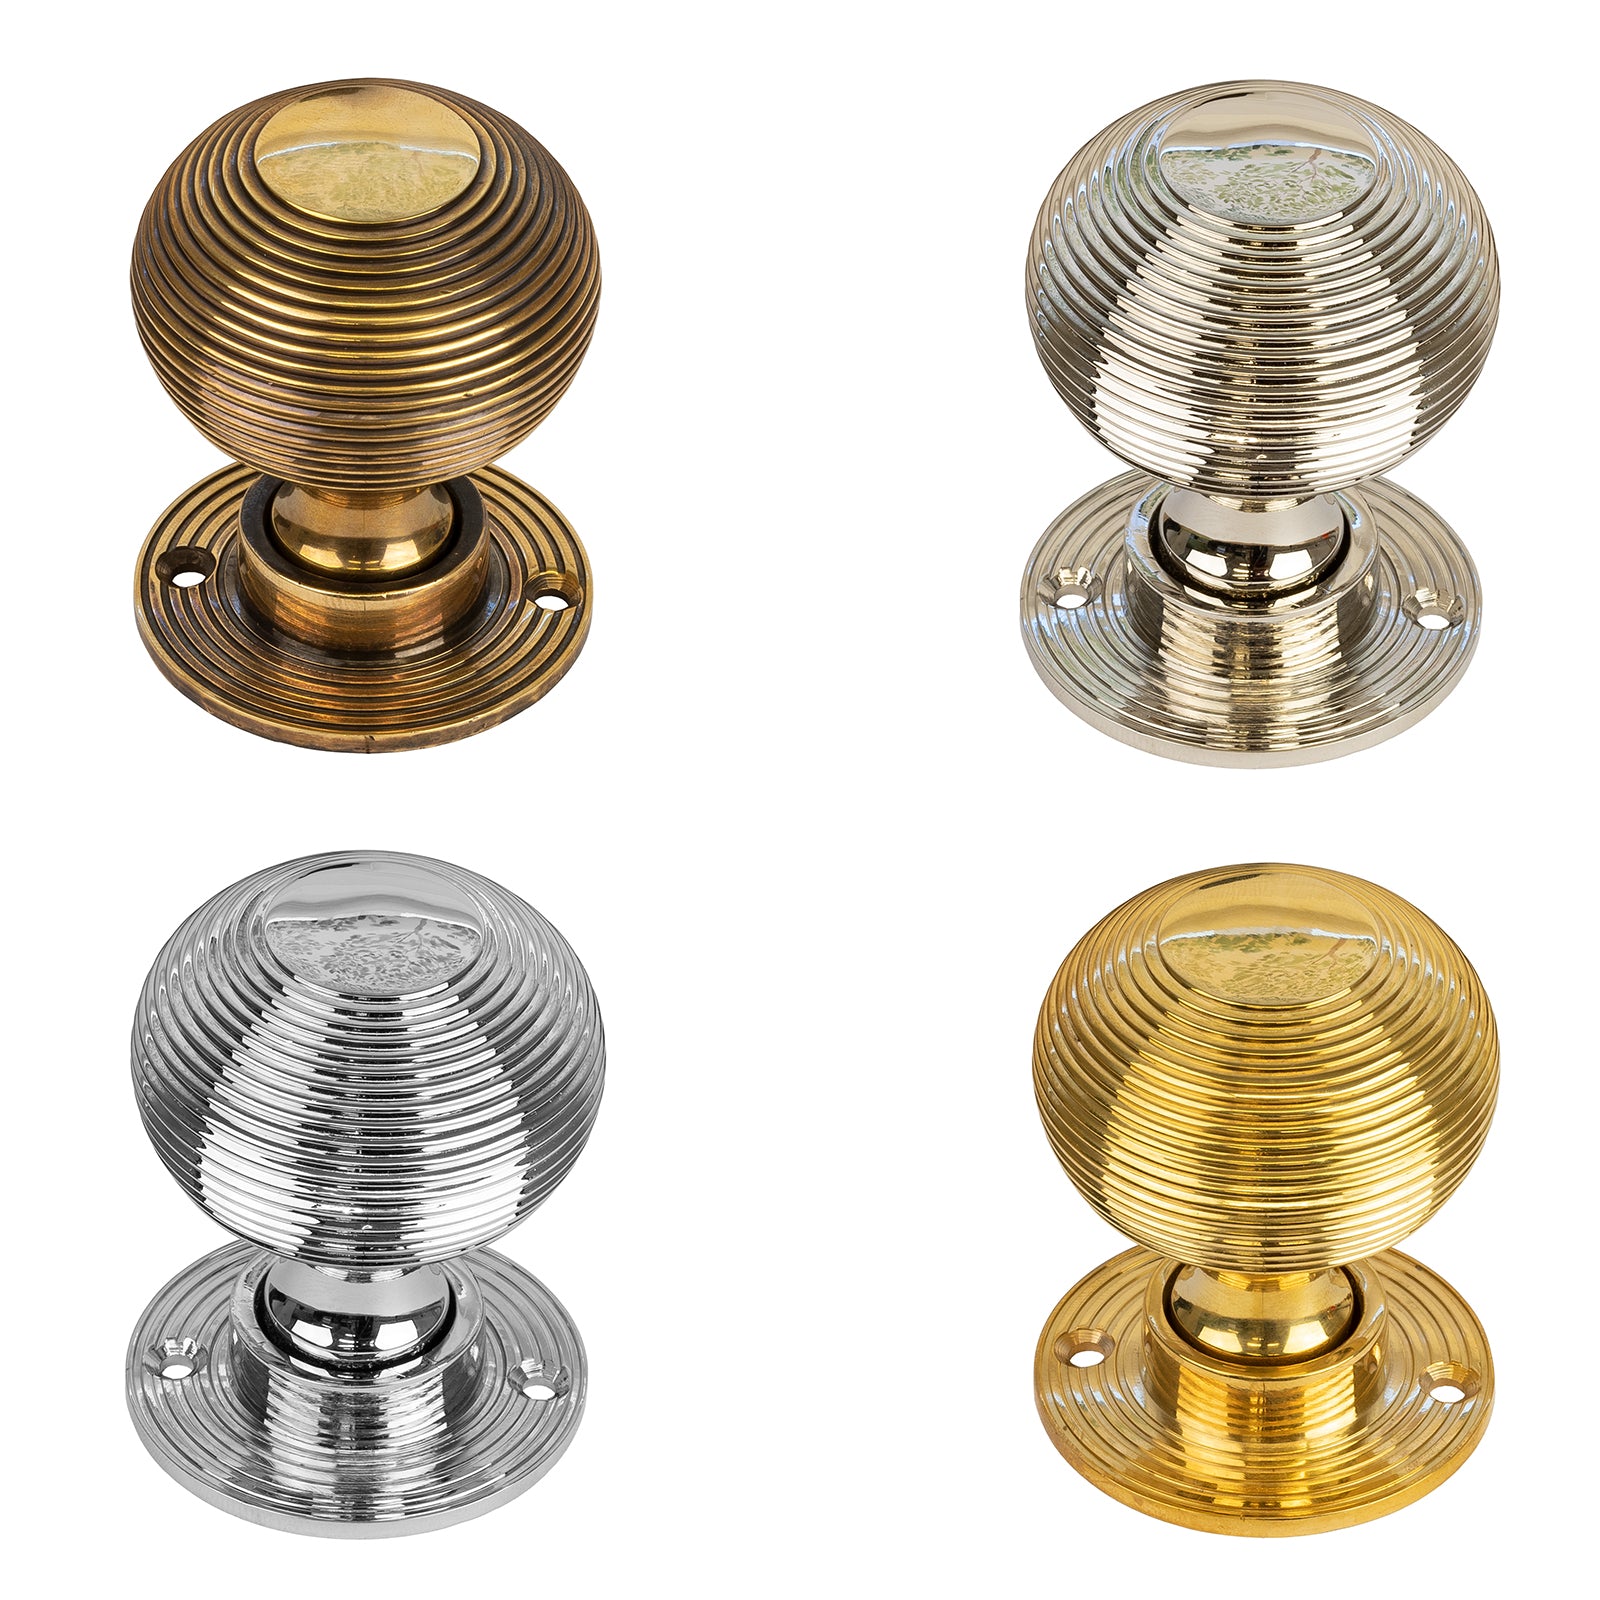 Beehive door knobs solid brass also known as brass beehive door handles and solid brass door knobs